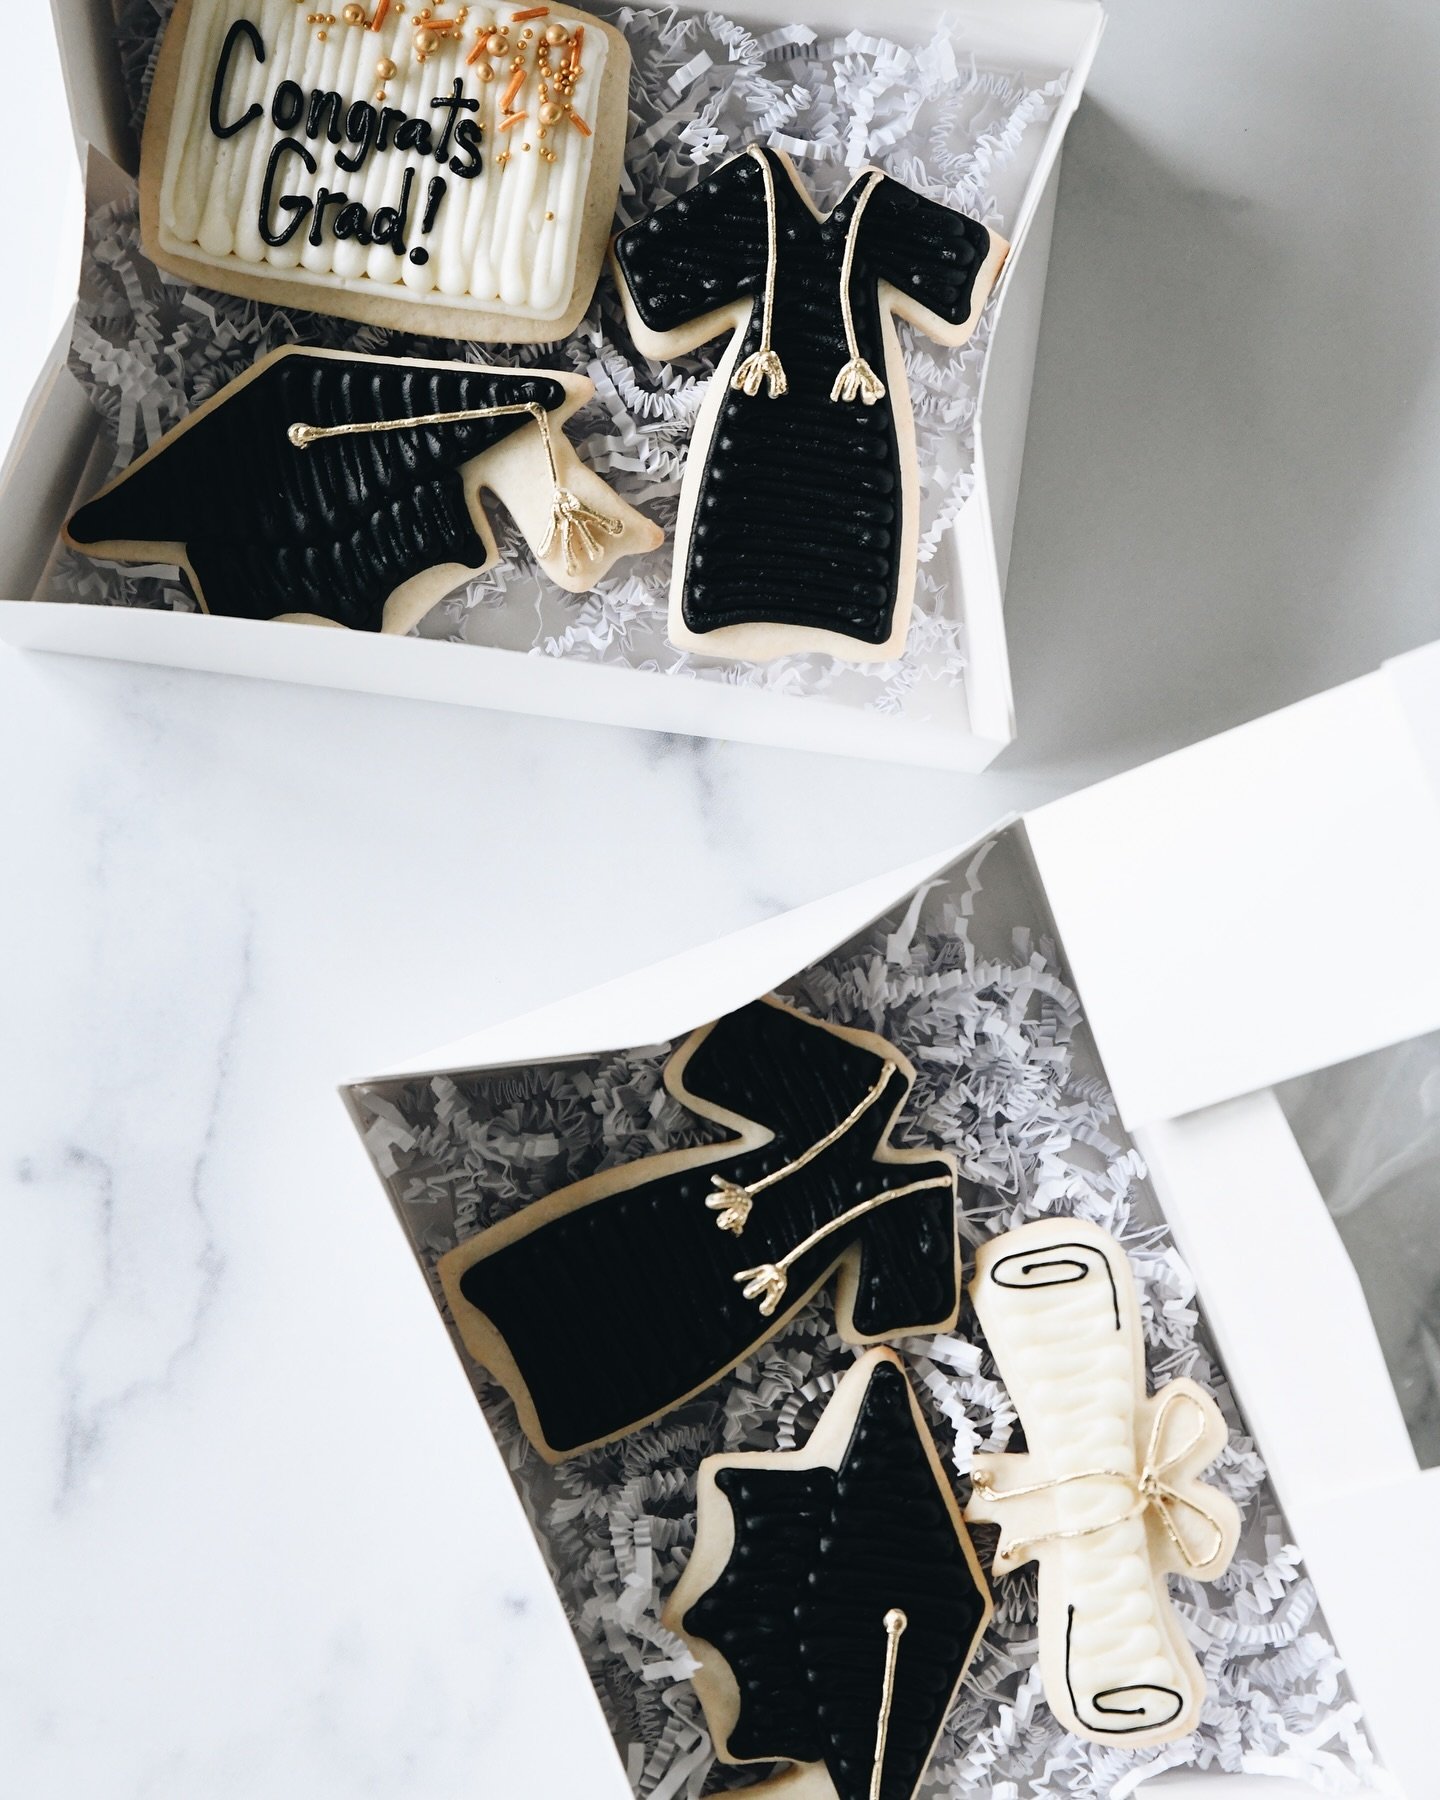 We love helping you celebrate grads! 🎓🎉There&rsquo;s still time to order cookie boxes and more. See our full Graduation Menu at the link in our Bio.